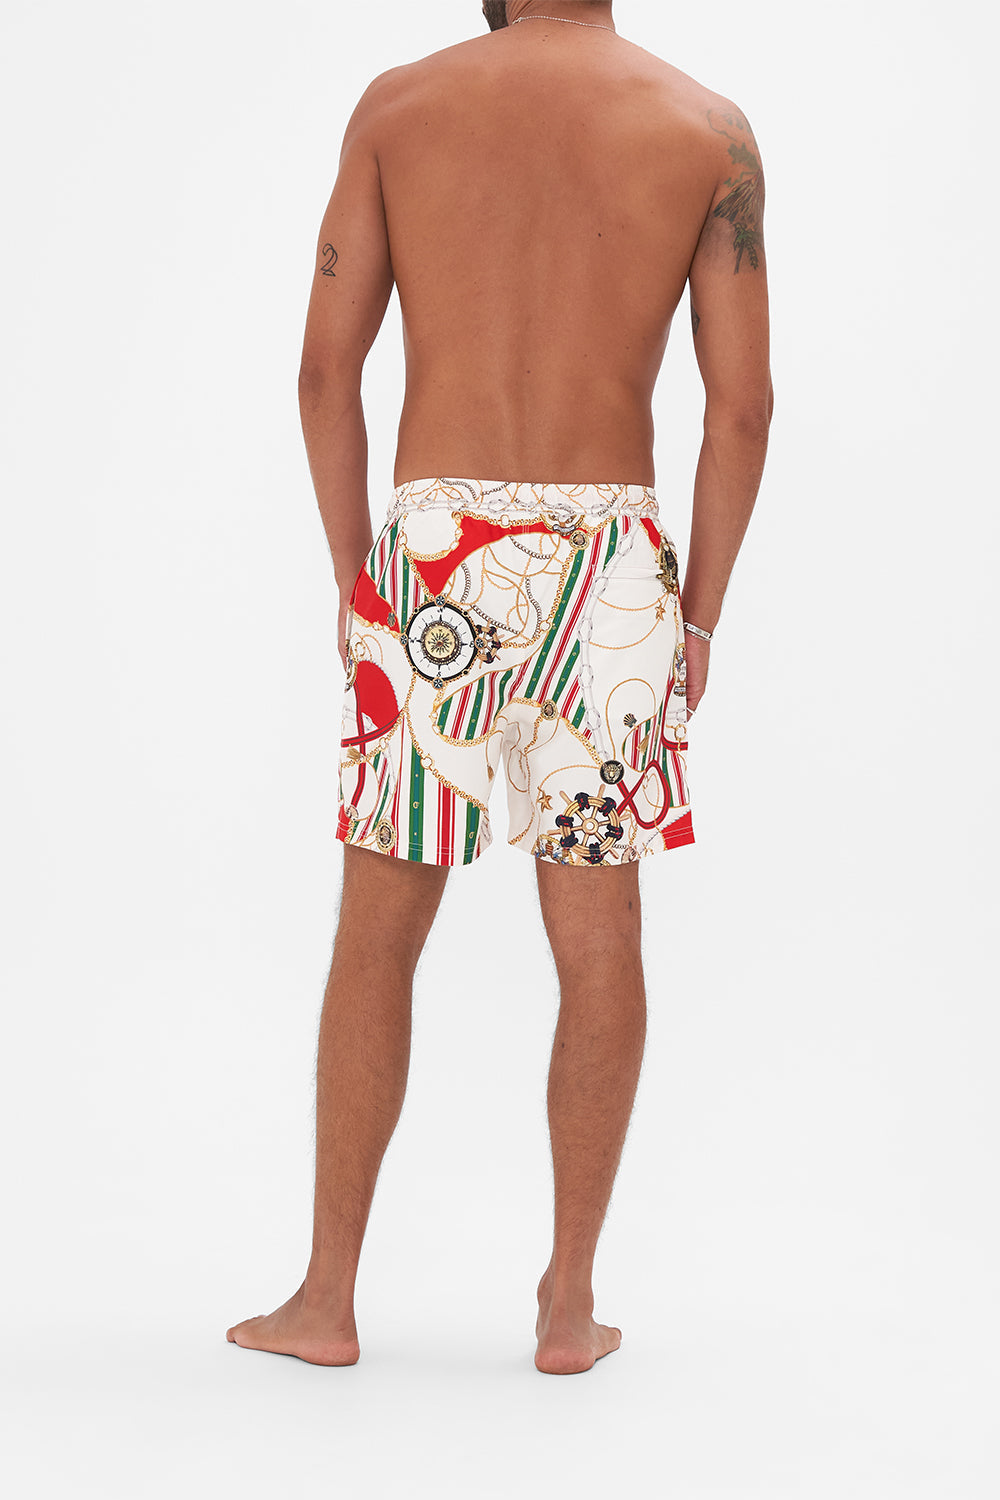 Back view of model wearing Hotel franks By CAMILLA mens boardshort in Saluti Summertime print